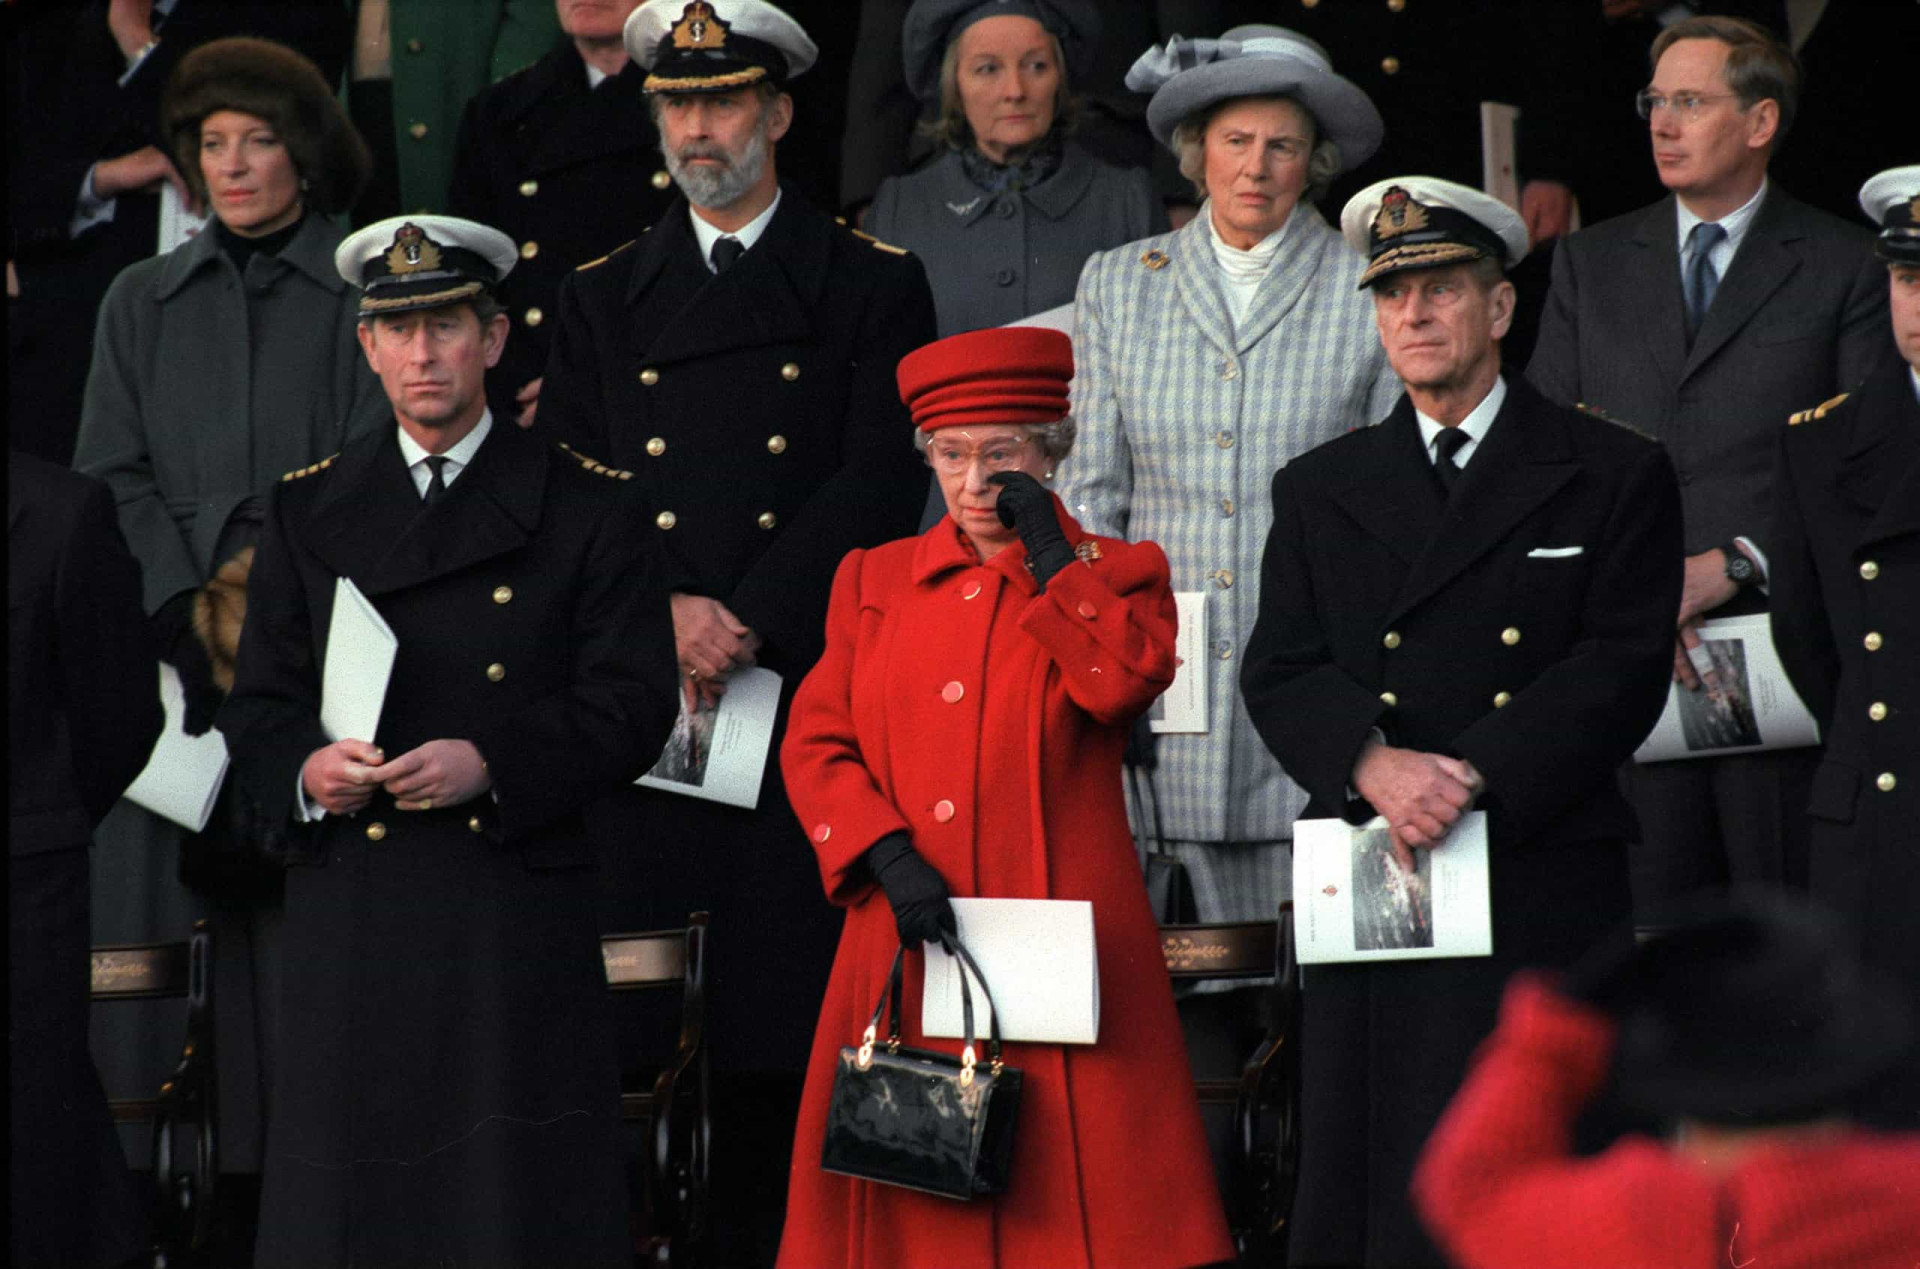 <p>On December 11, 1997, after 44 years in royal service, Britannia was retired from the seas. The late Queen, normally undemonstrative, was seen wiping away a tear during the decommissioning service, which was also attended by Prince Philip and Prince Charles.</p><p><a href="https://www.msn.com/en-sg/community/channel/vid-7xx8mnucu55yw63we9va2gwr7uihbxwc68fxqp25x6tg4ftibpra?cvid=94631541bc0f4f89bfd59158d696ad7e">Follow us and access great exclusive content every day</a></p>